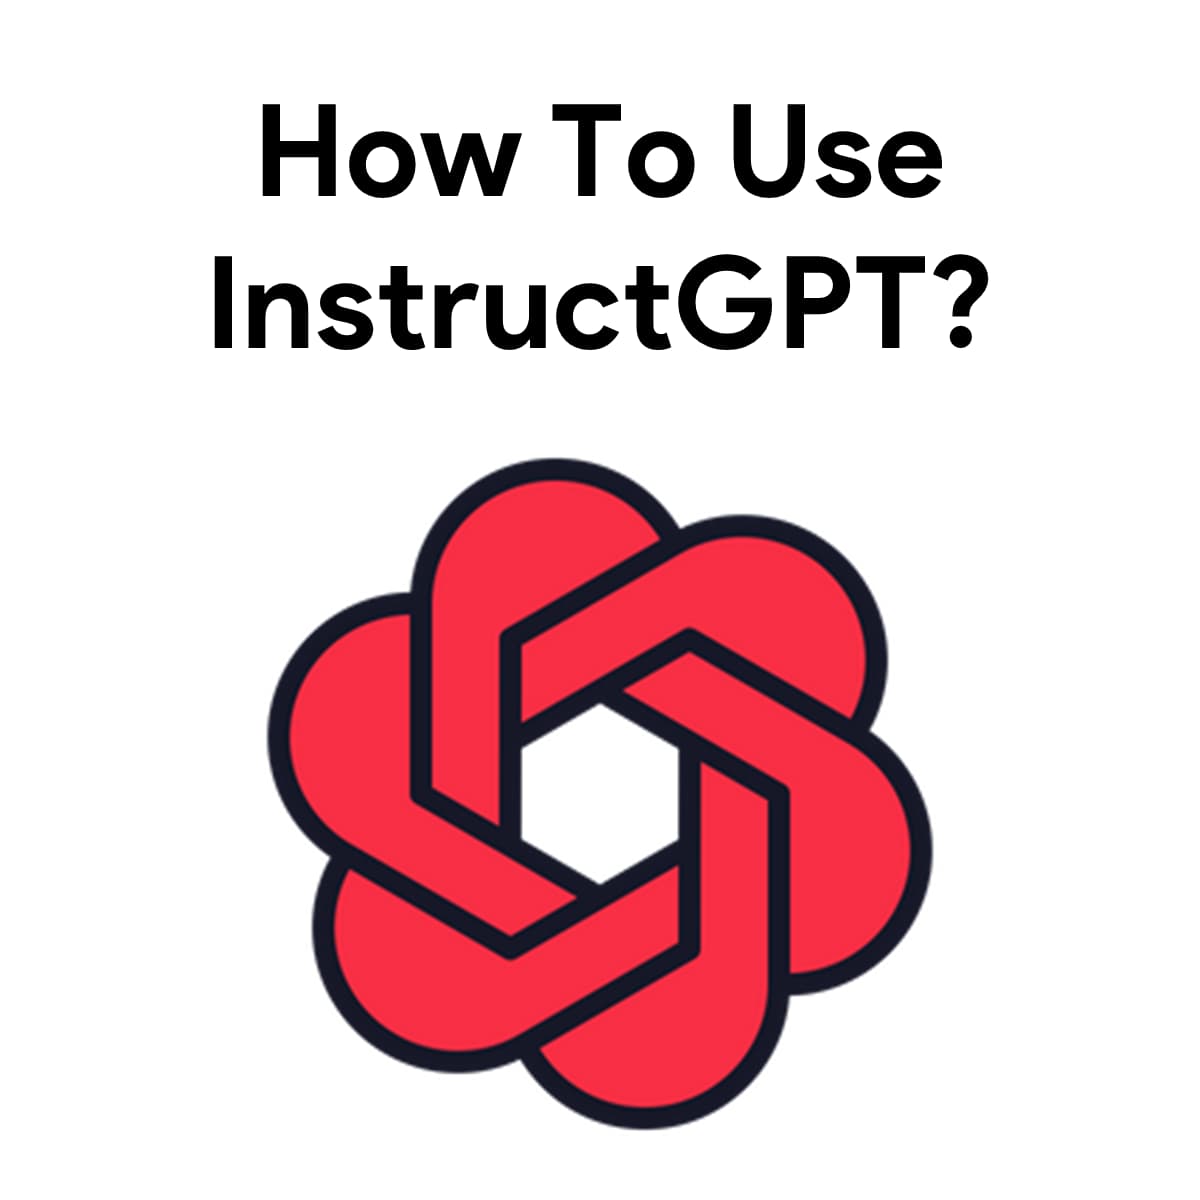 How To Use InstructGPT